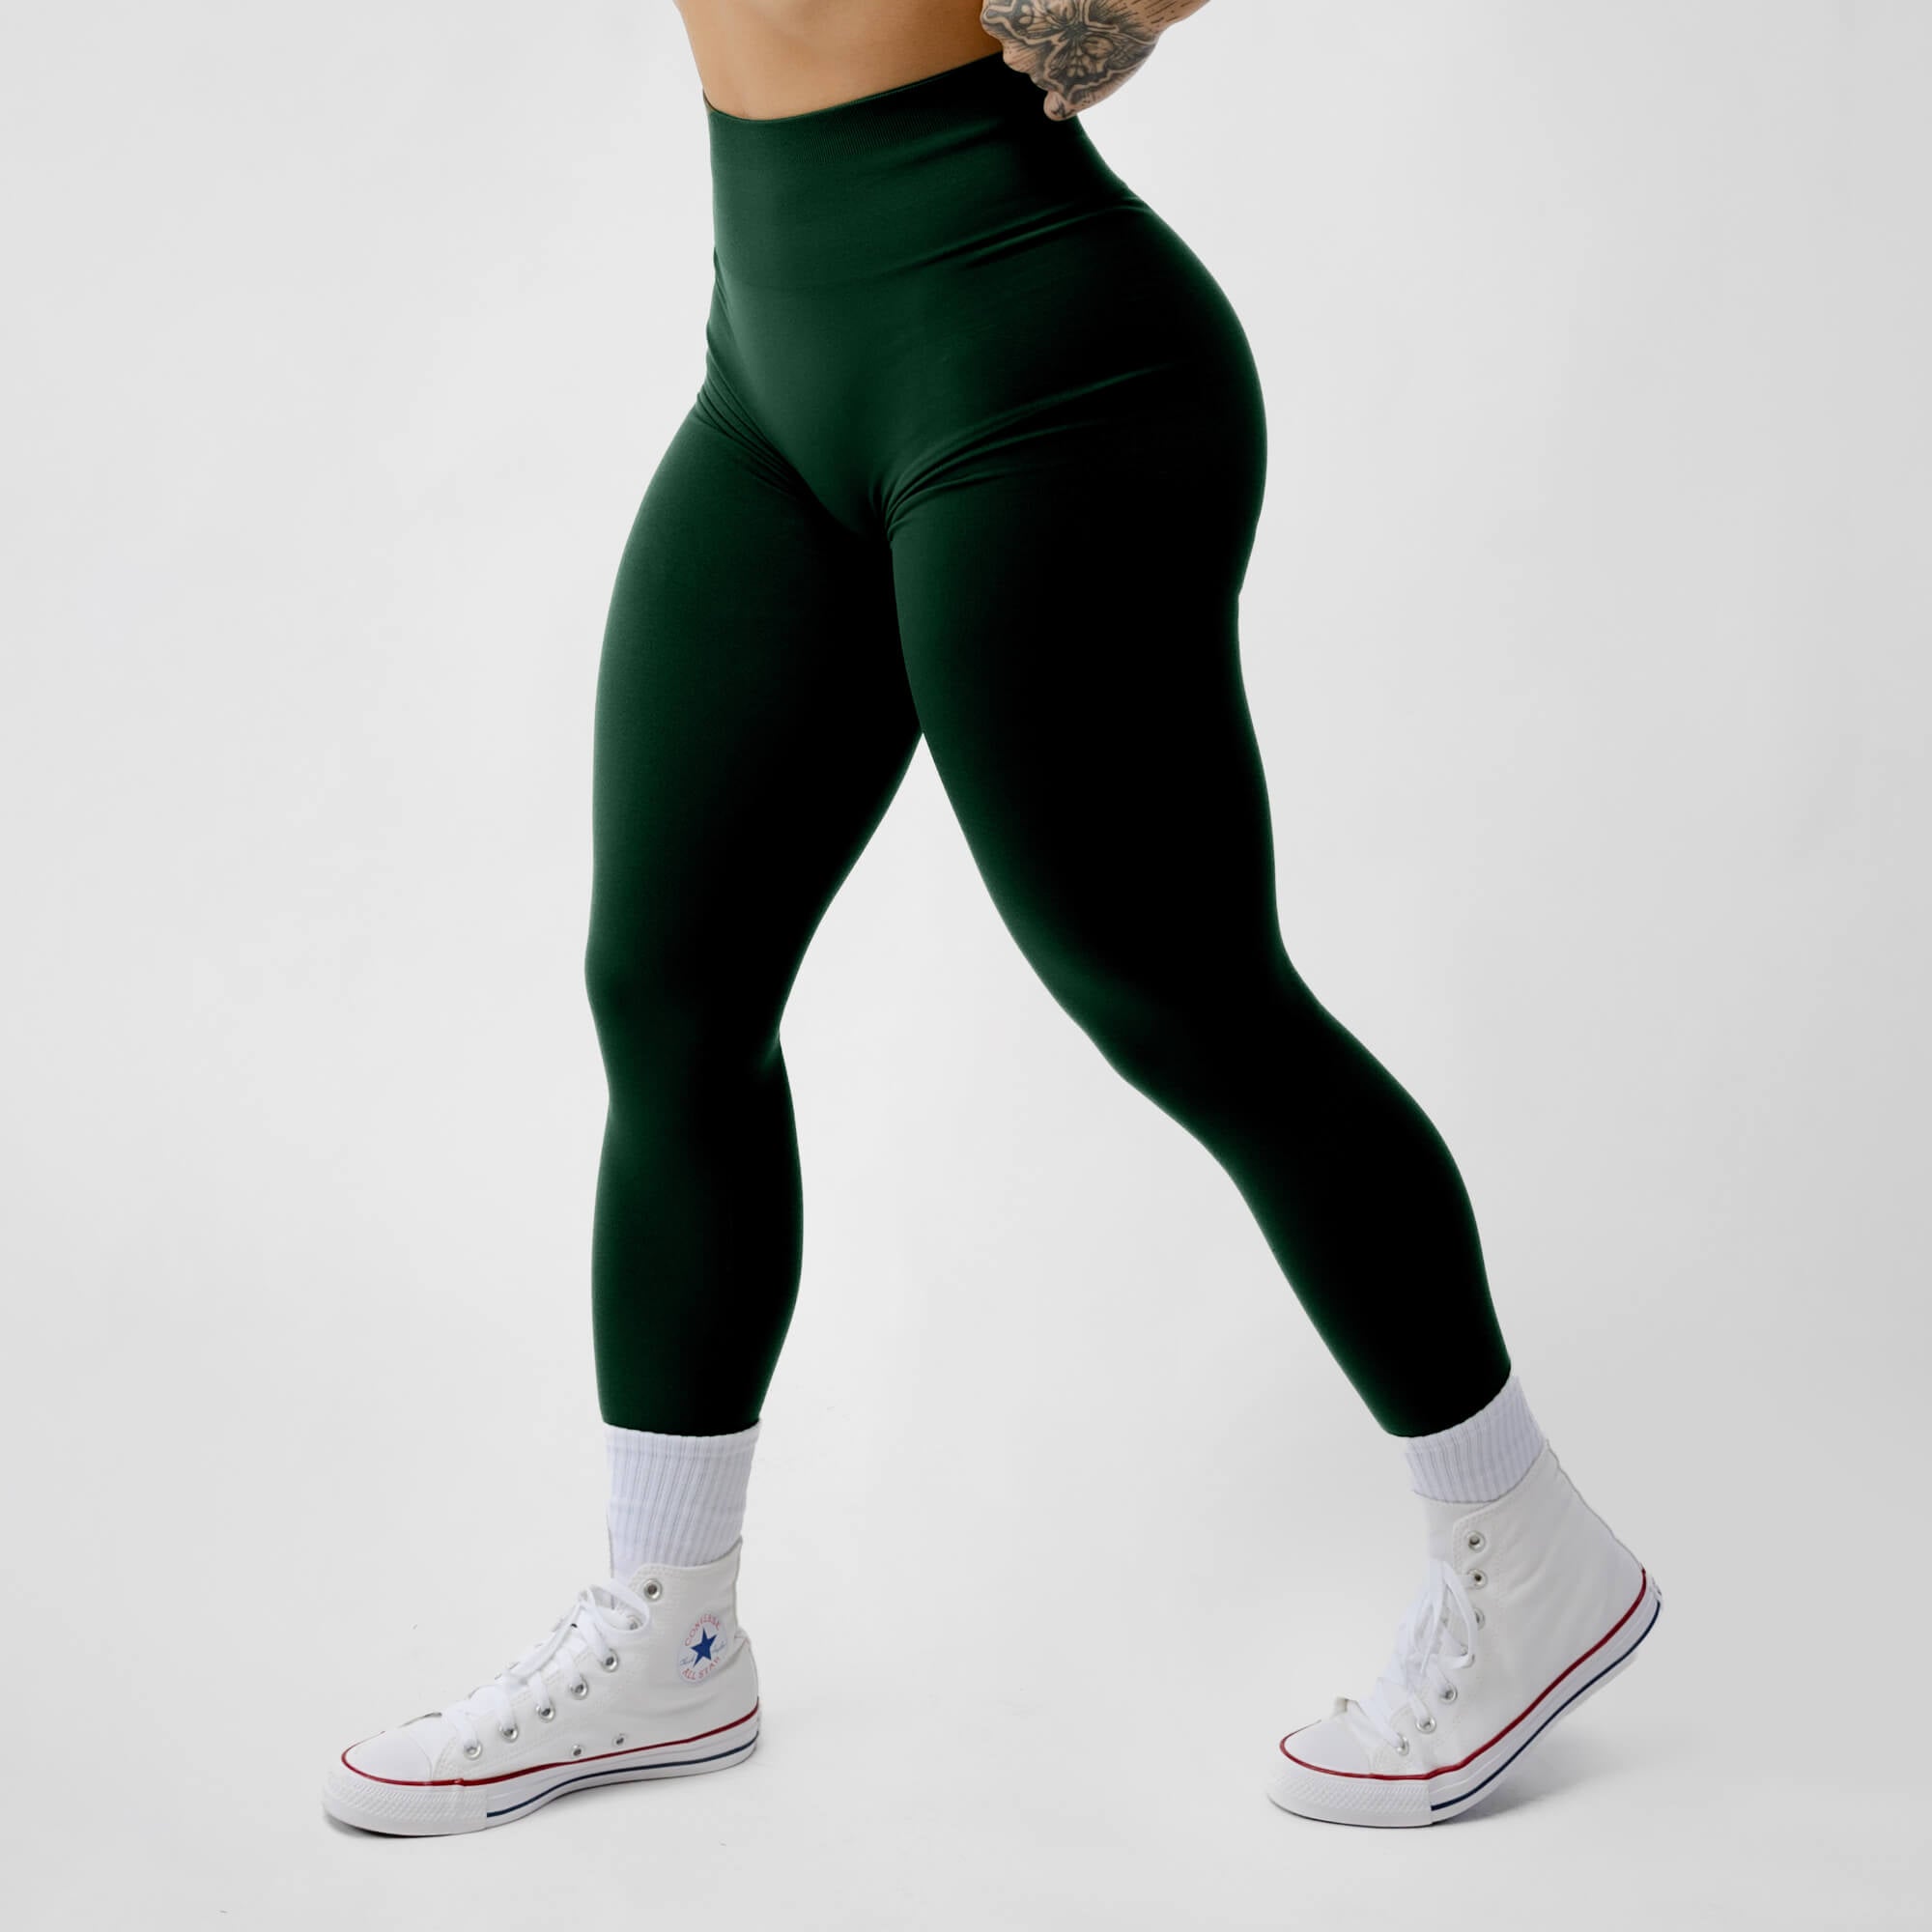 BuffBunny Stretch Active Pants, Tights & Leggings